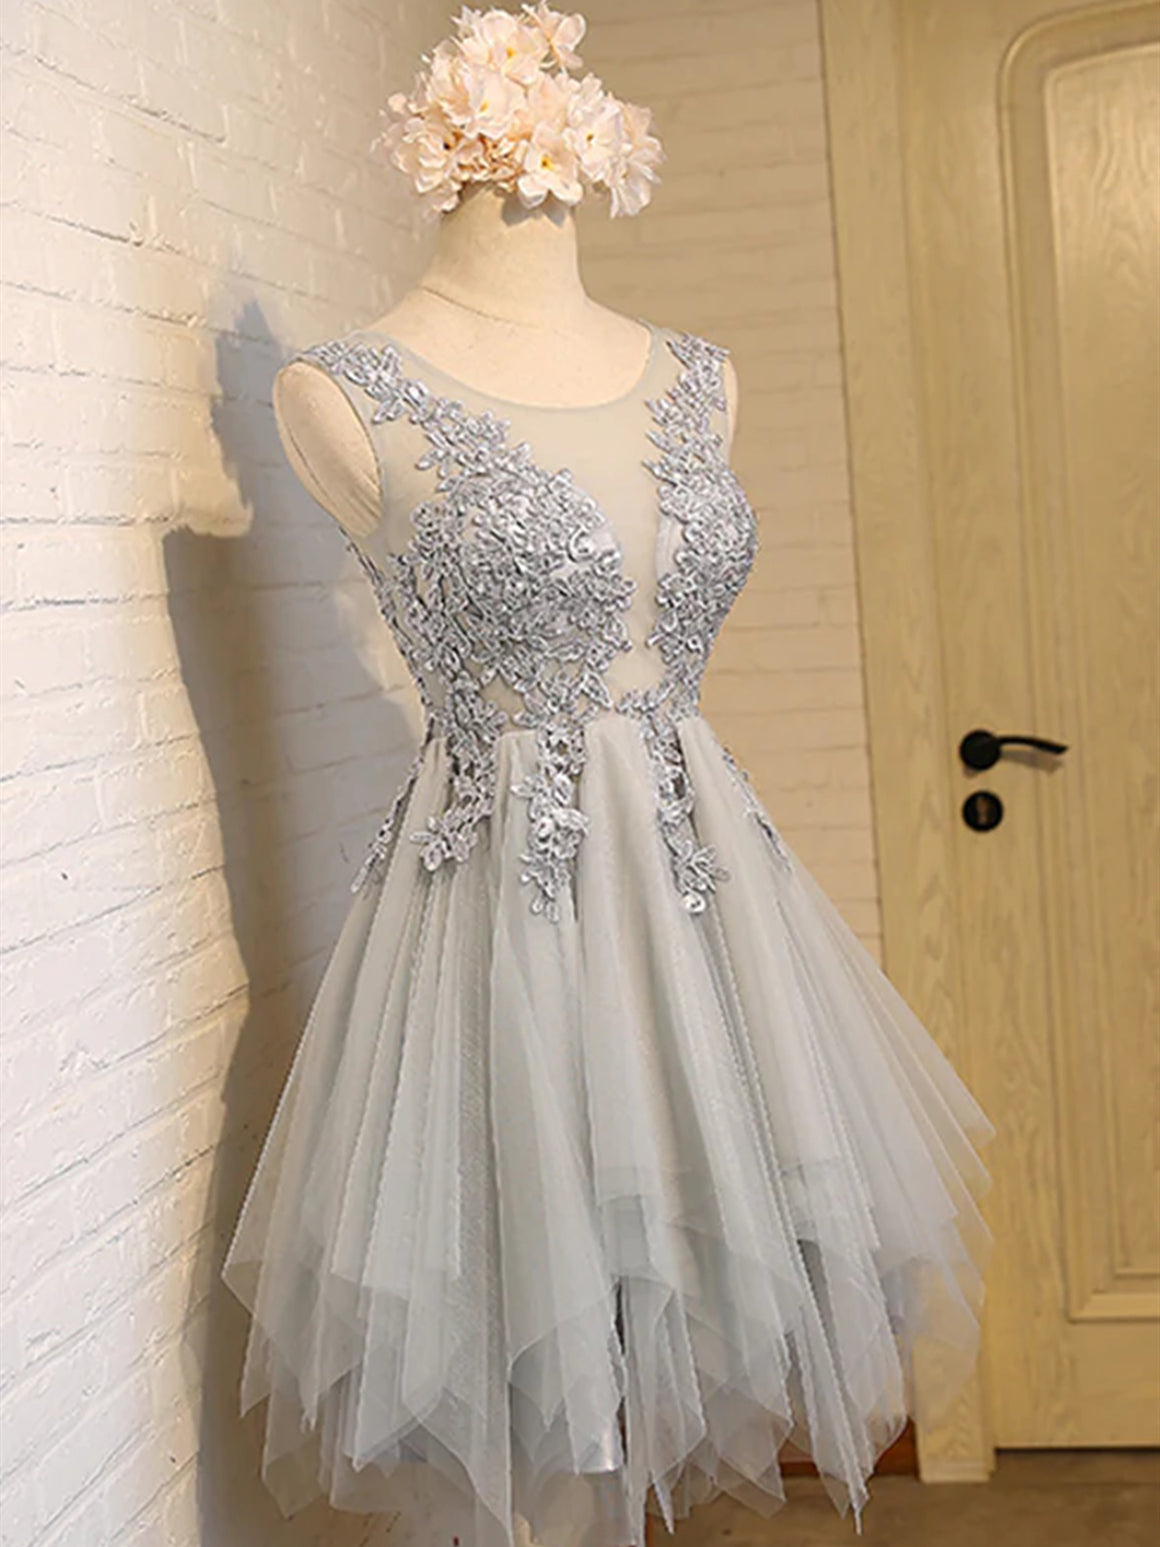 Round Neck Short Gray Lace Prom Dresses, Short Grey Lace Homecoming Dresses